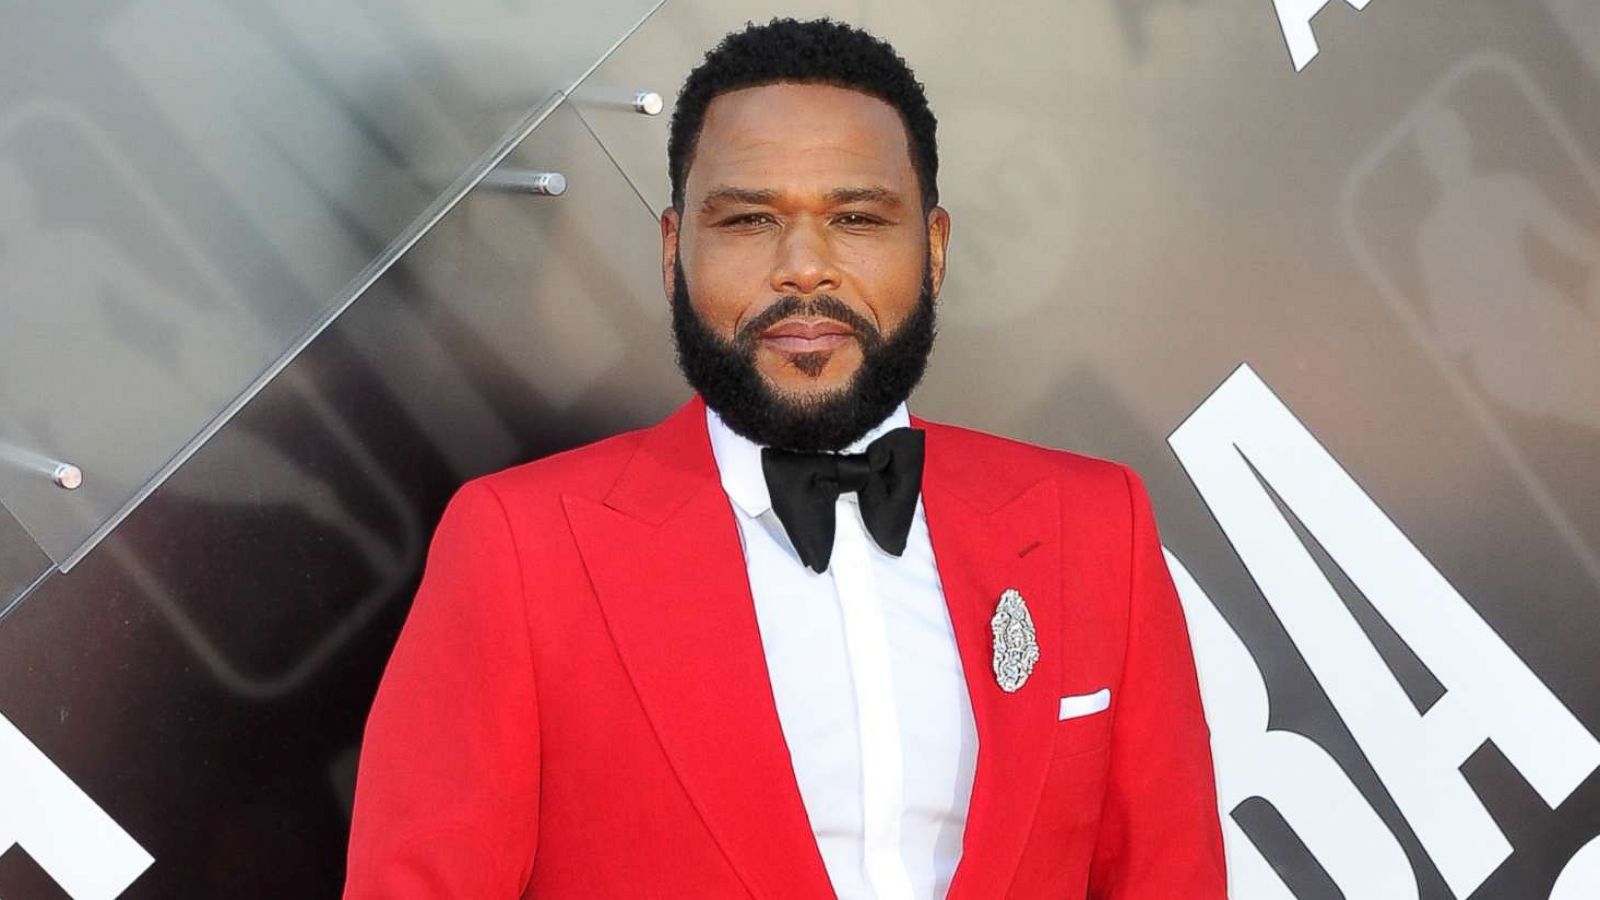 Anthony Anderson Reveals He Will Graduate from Howard University This Spring